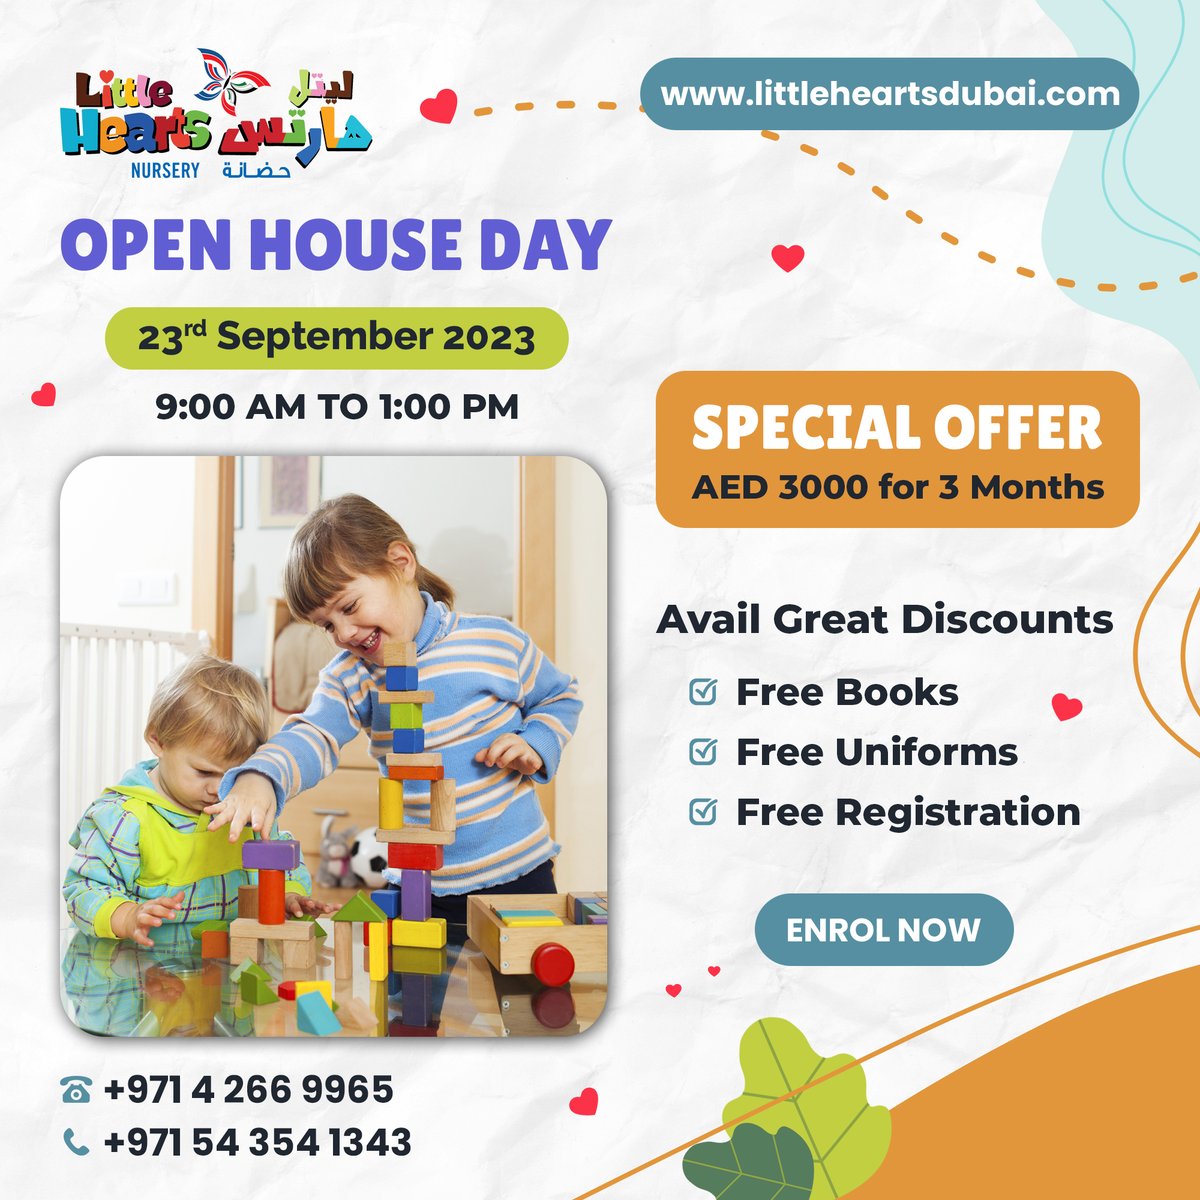 Join us for our Open House Day . 
🔥Special offer: AED 3000/- for 3 Months!!
Avail other benefits include:
📌Free Uniform
📌Free Books
📌Free Registration
#preschool #KHDA #eyfscurriculum #dubainursery #happykids #littlehearts #preschoolactivities #preschoolclasses